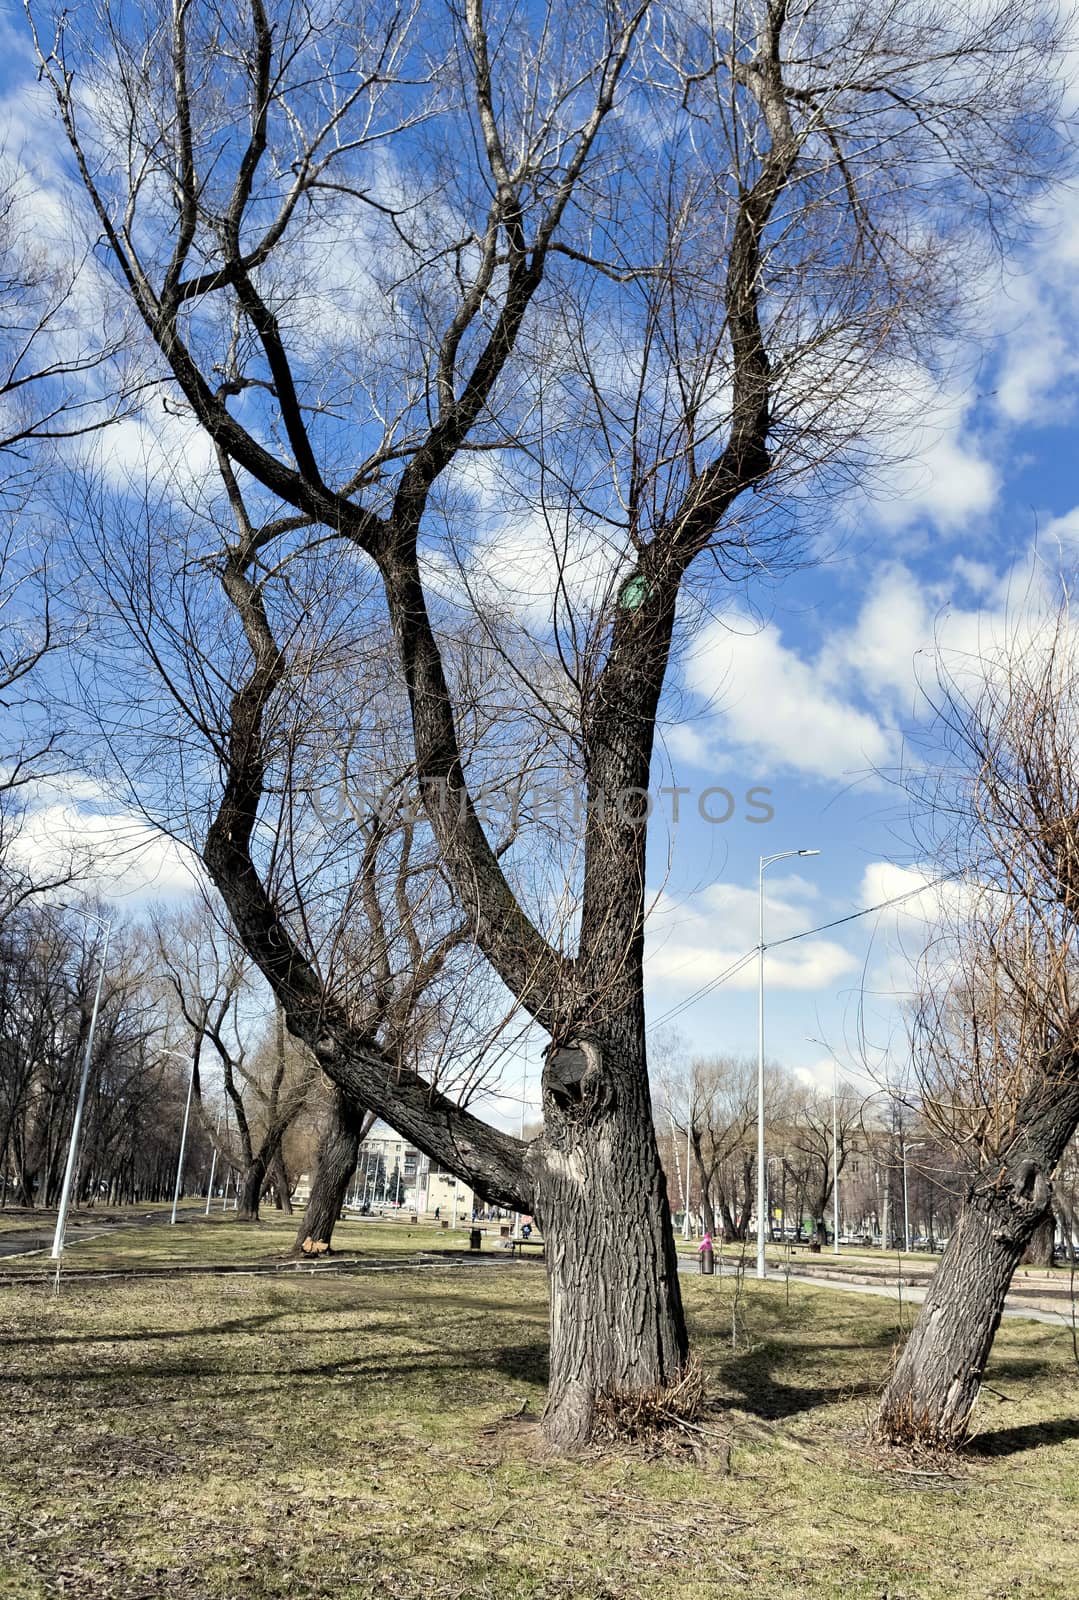 old elm, the tree with latin name ulmus laevis, on blue sky background with clouds in city square